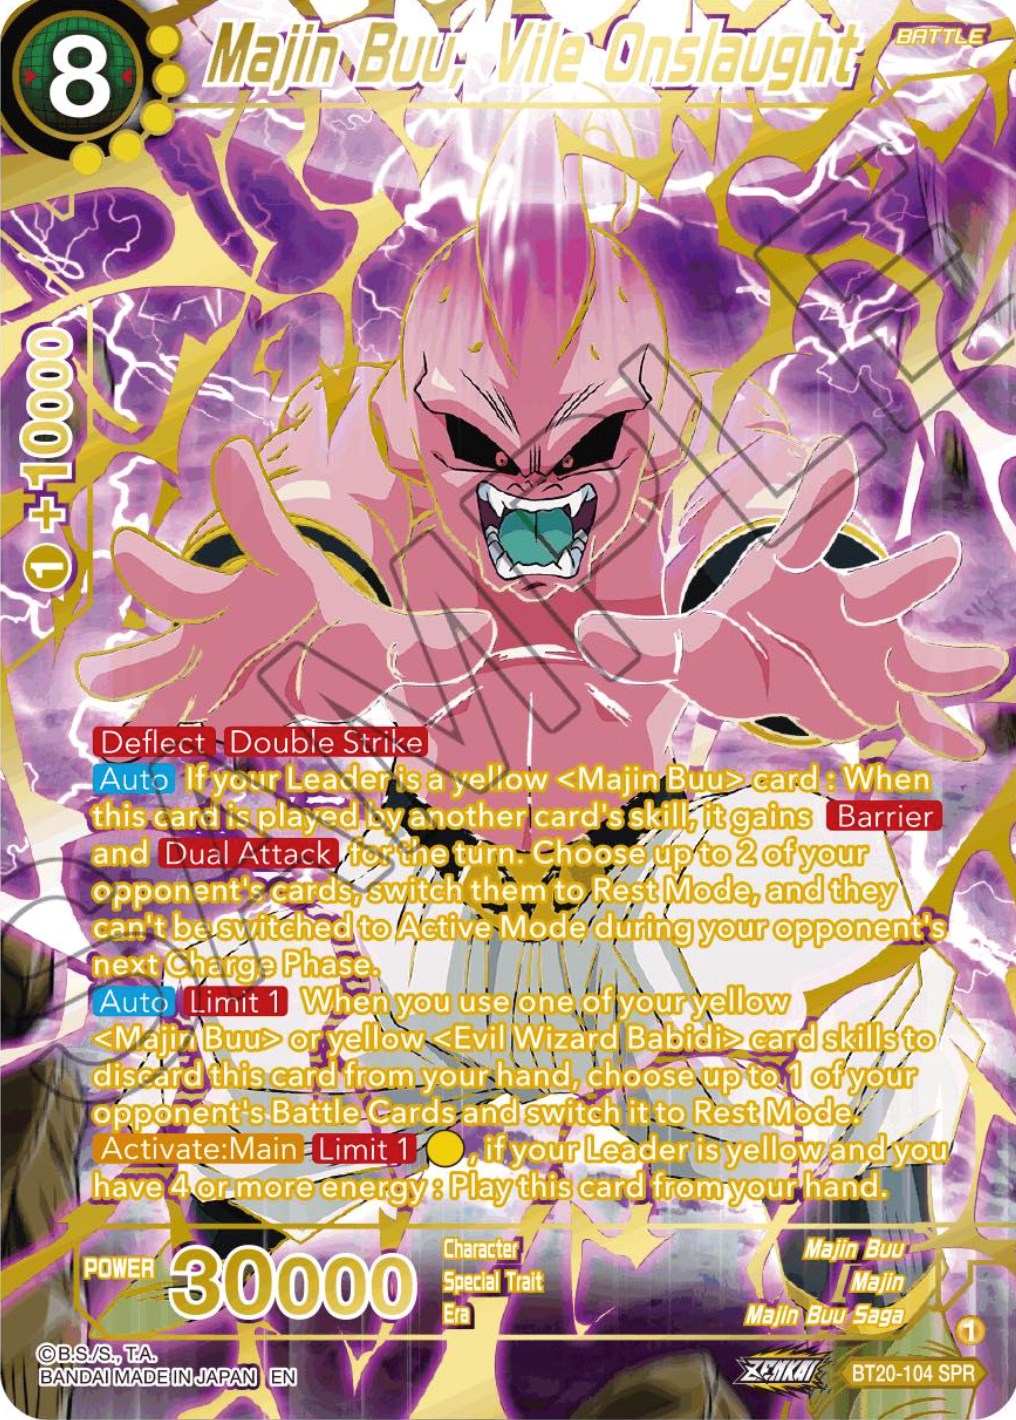 Majin Buu, Vile Onslaught (SPR) (BT20-104) [Power Absorbed] | North Valley Games